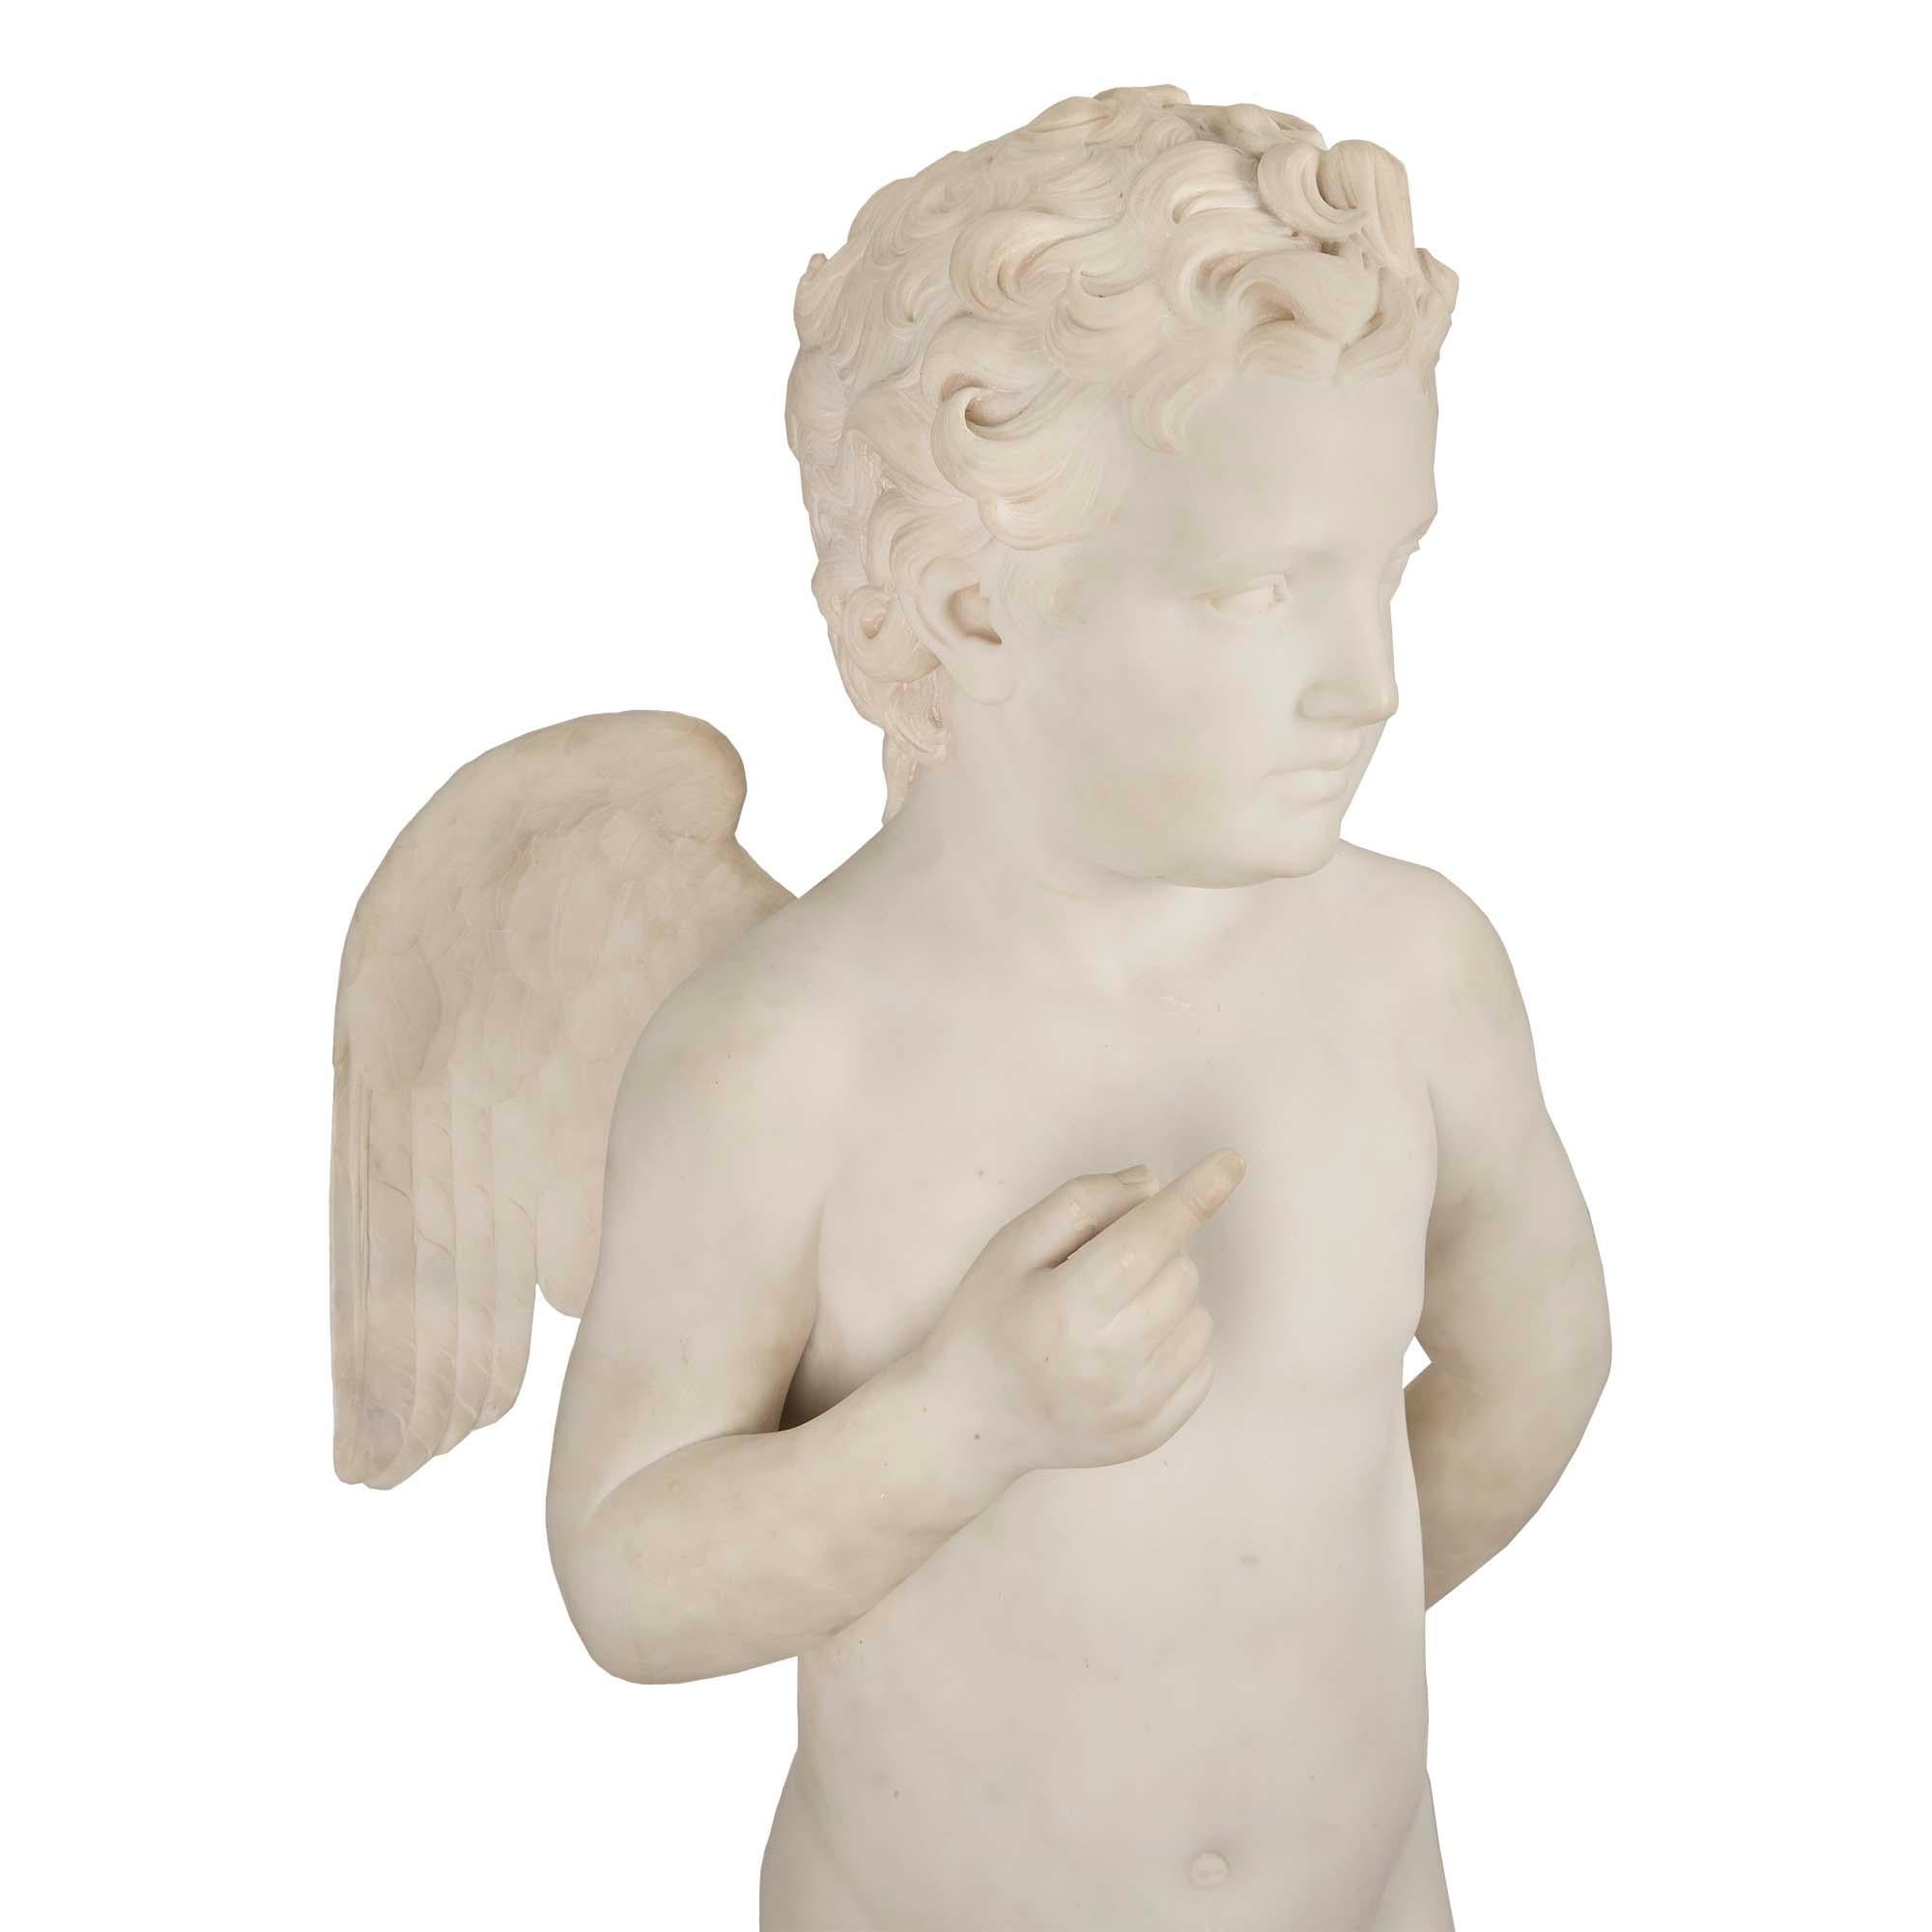 Carrara Marble 19th Century White Carrara Sculpture, Signed Chauncey Bradley Ives For Sale